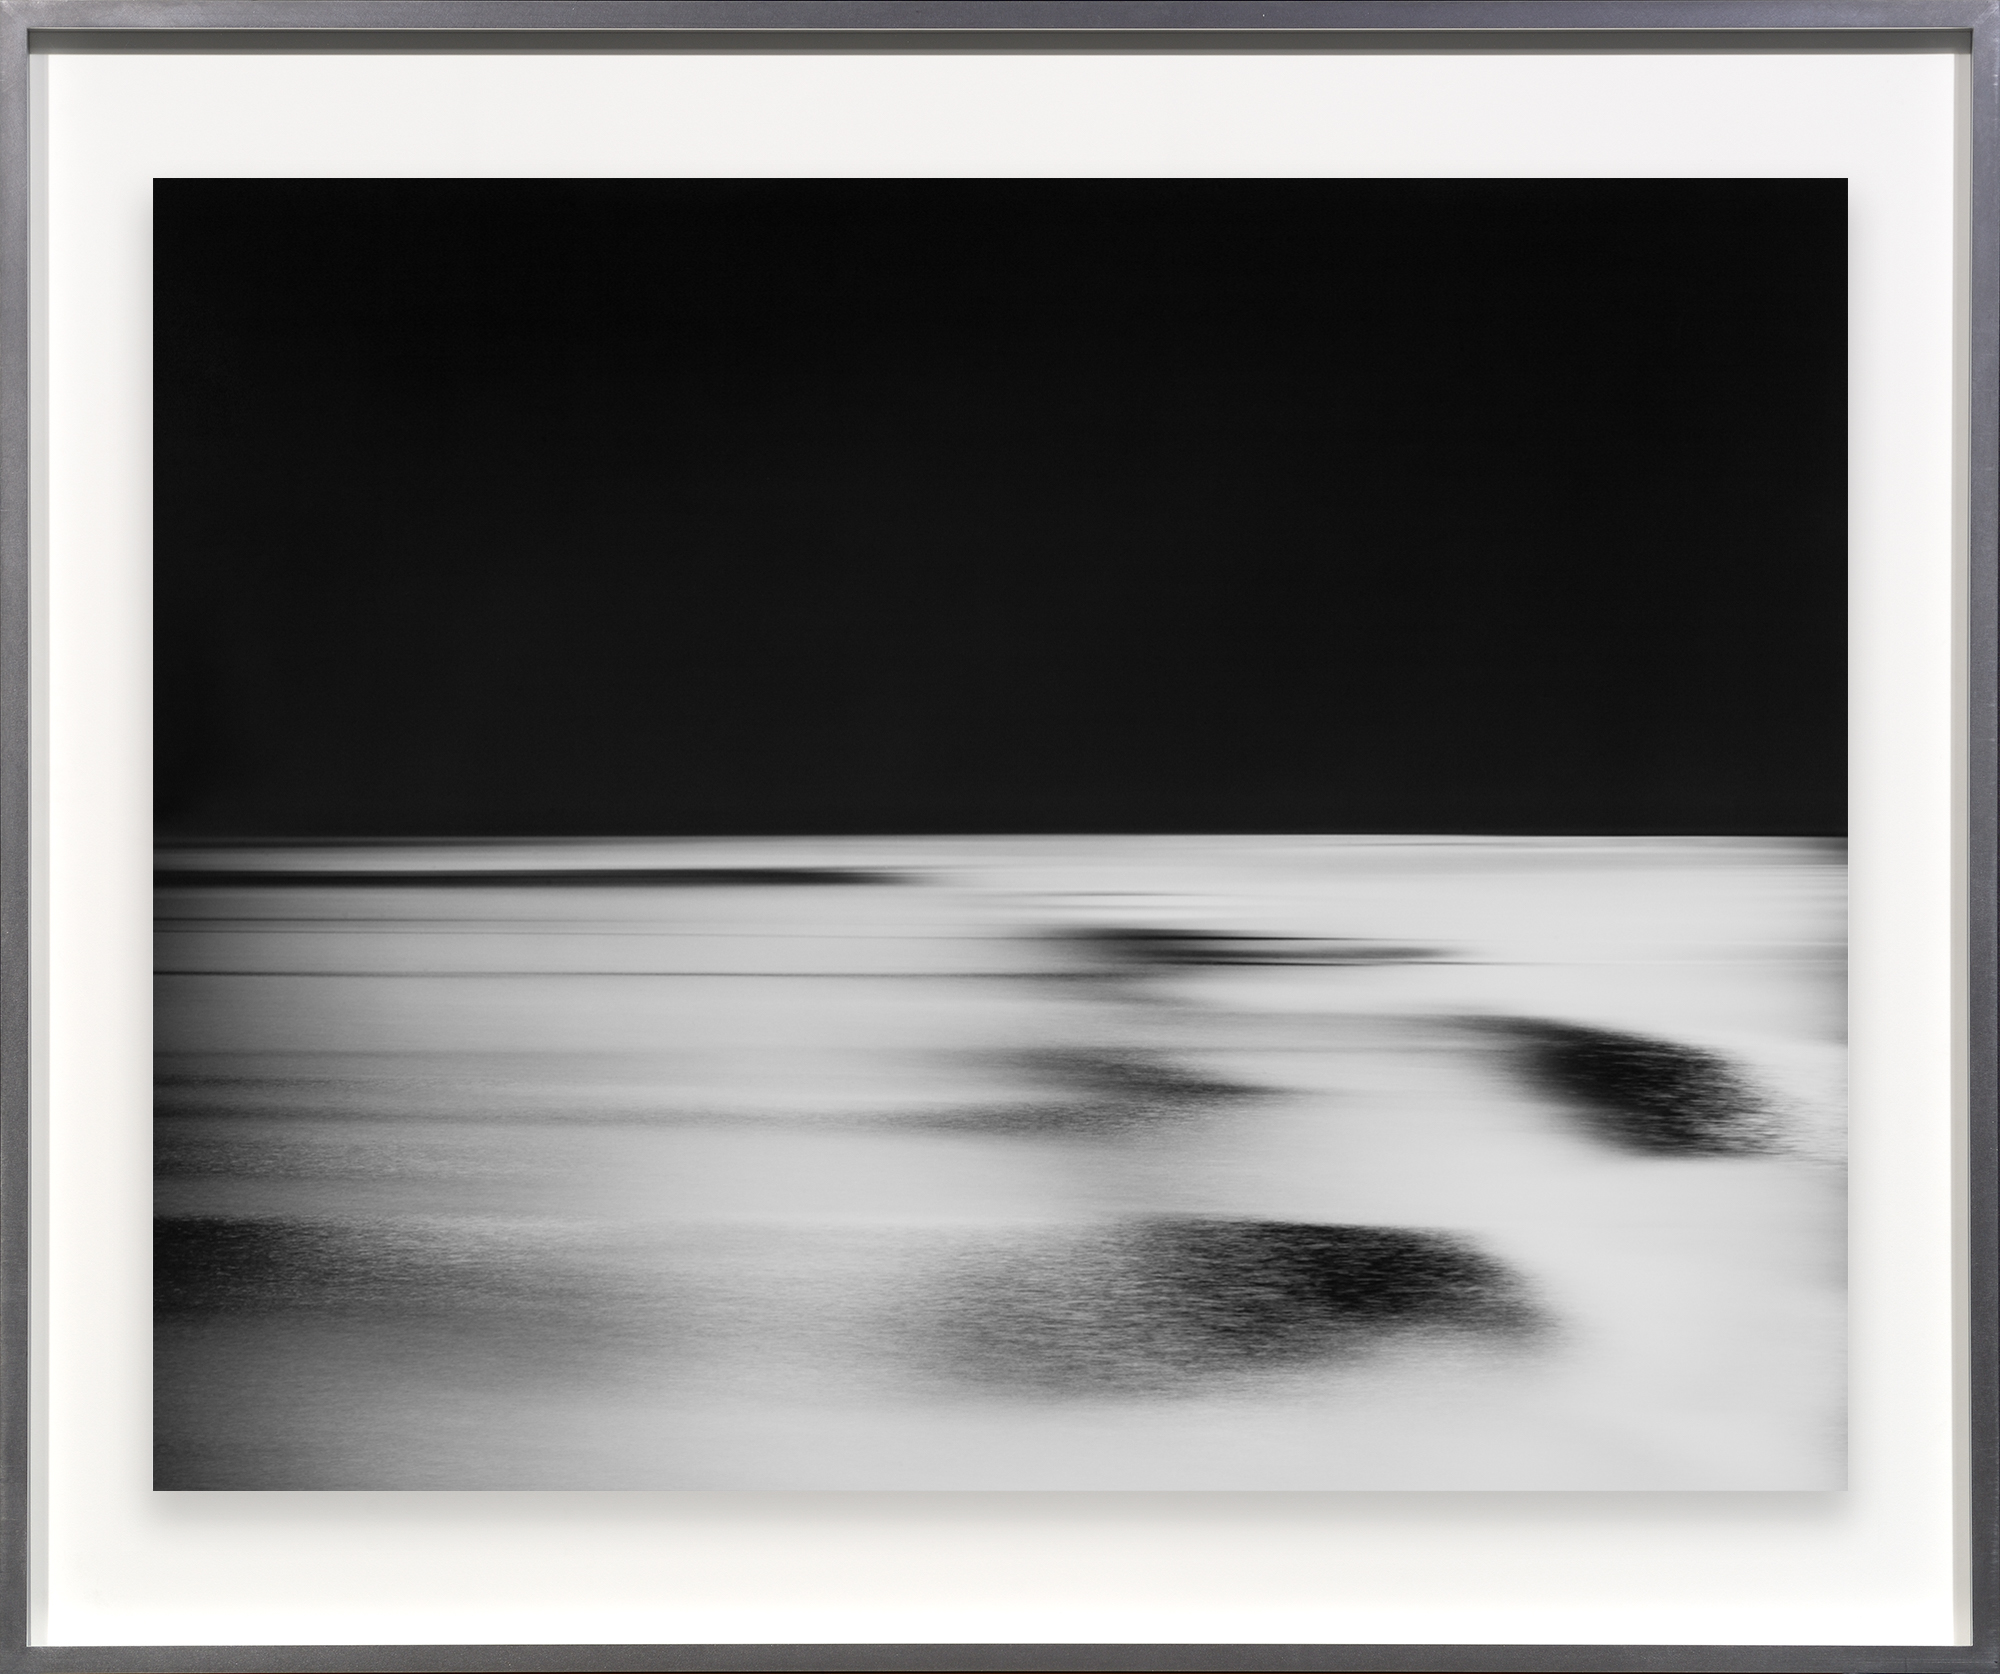 Color image of a black and white photograph of a time lapse of a river along the horizon framed in metal